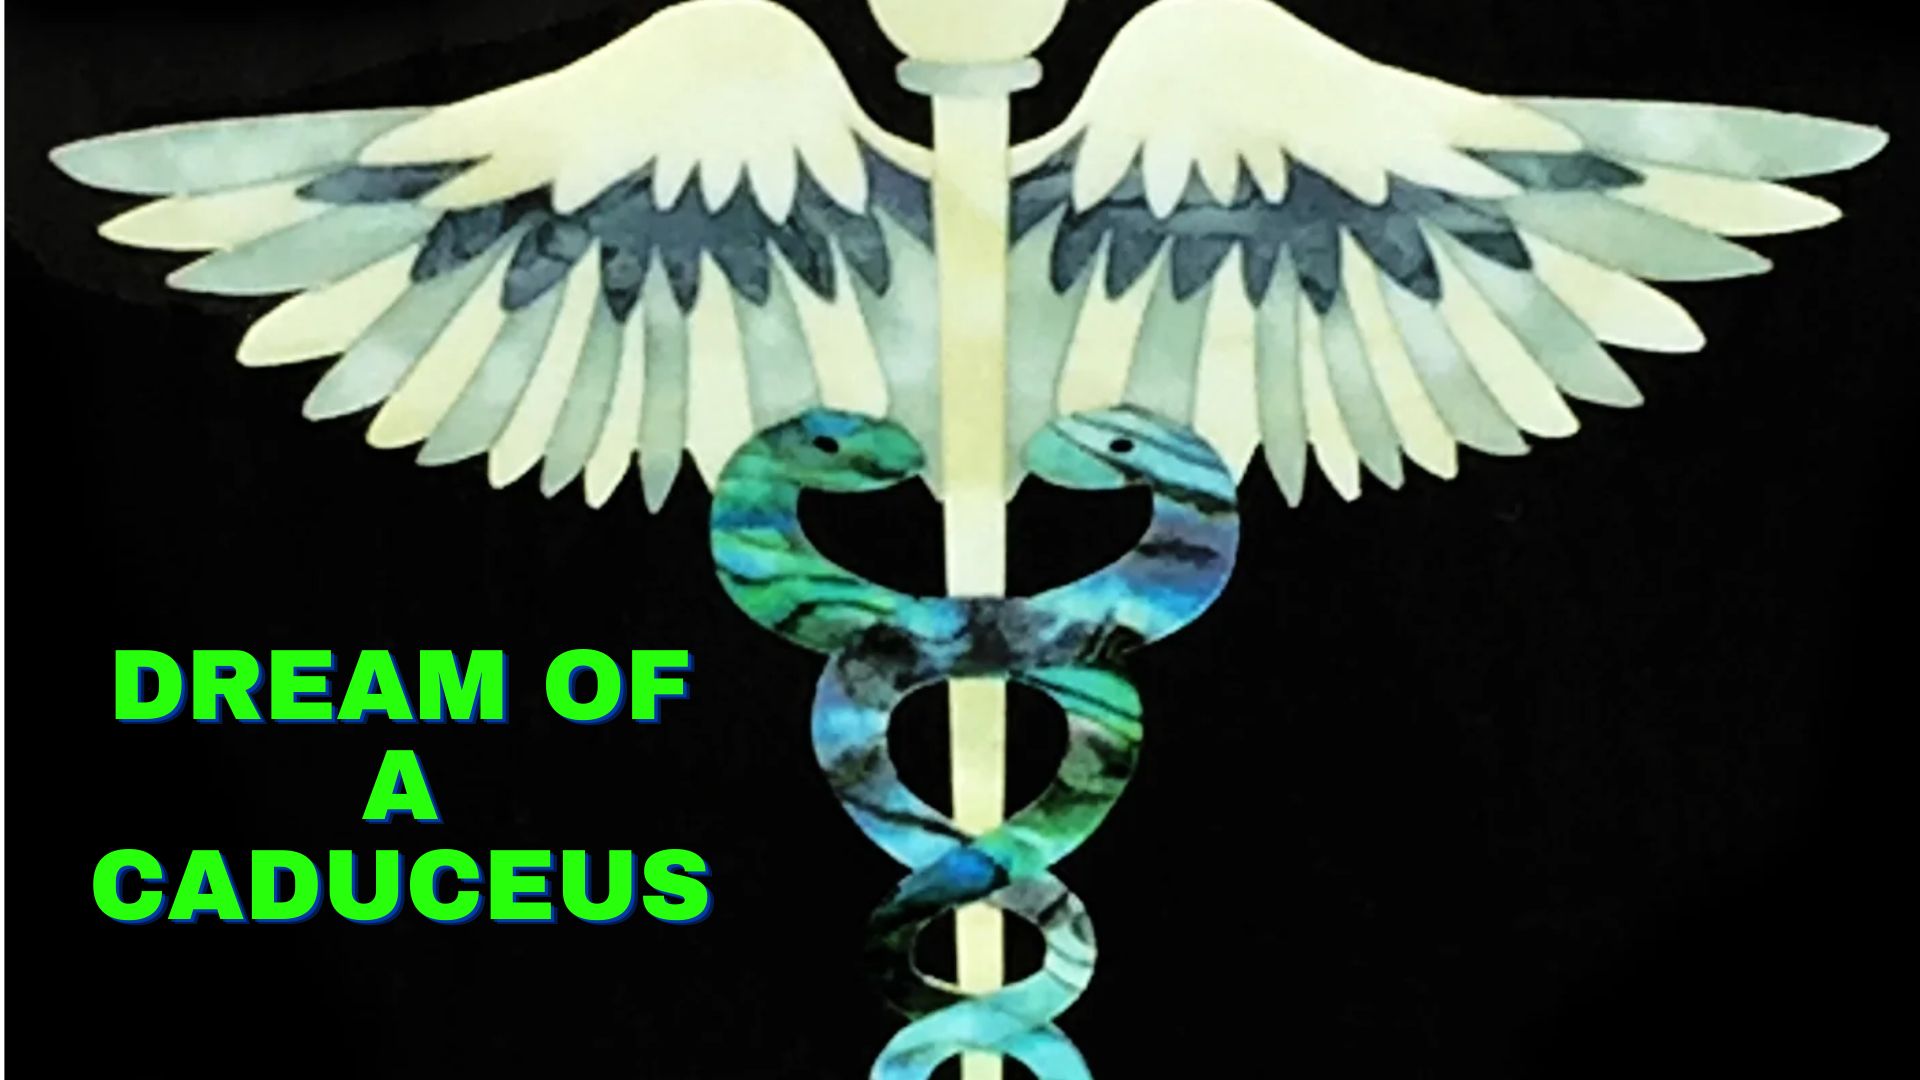 Dream Of A Caduceus - Signifies Healing Or A Concern For Health